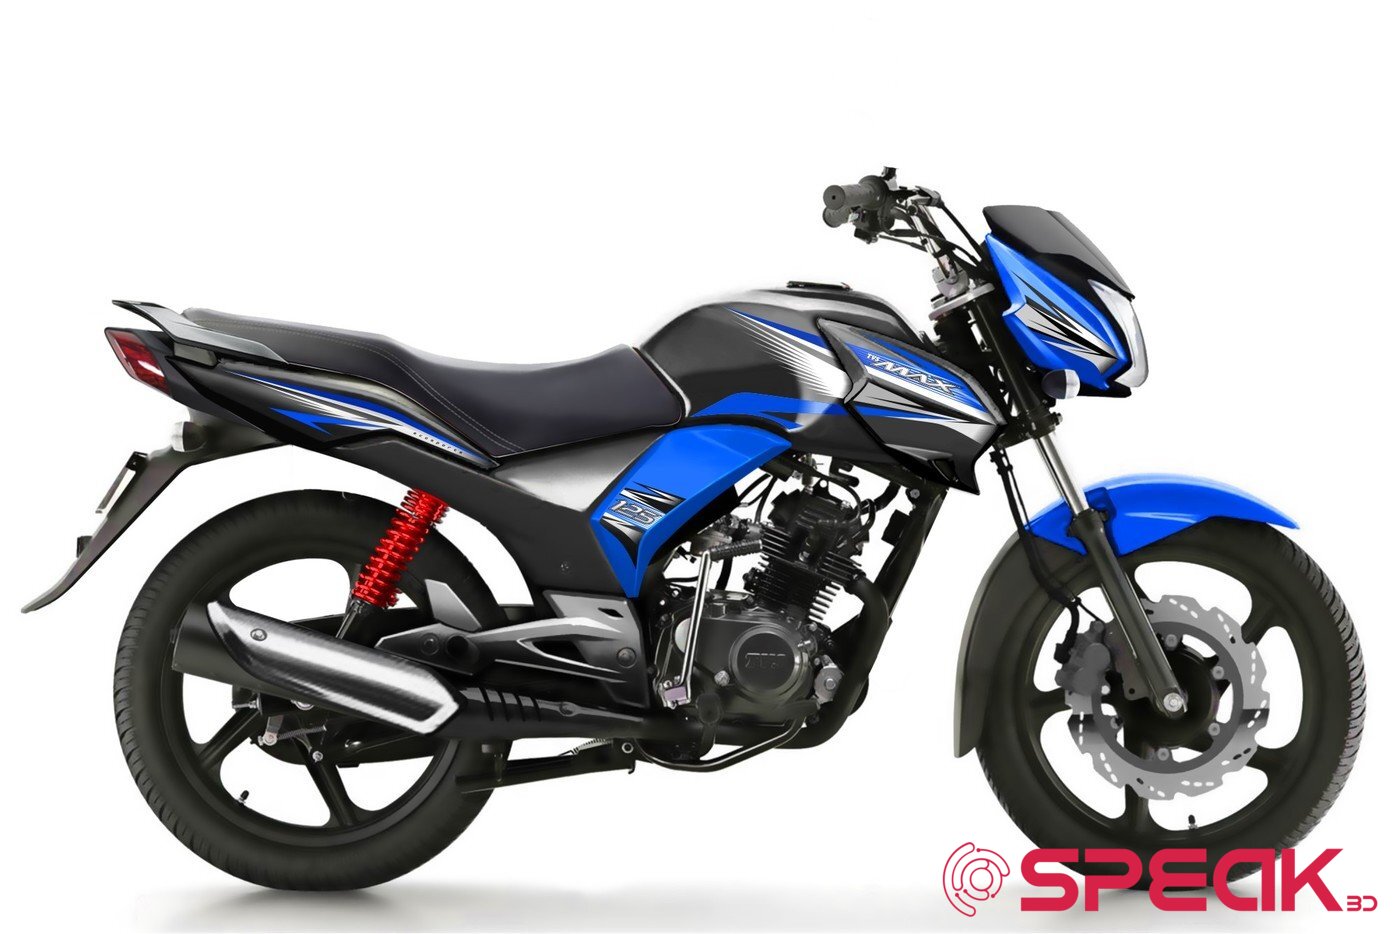 TVS Max 125 - Pictures